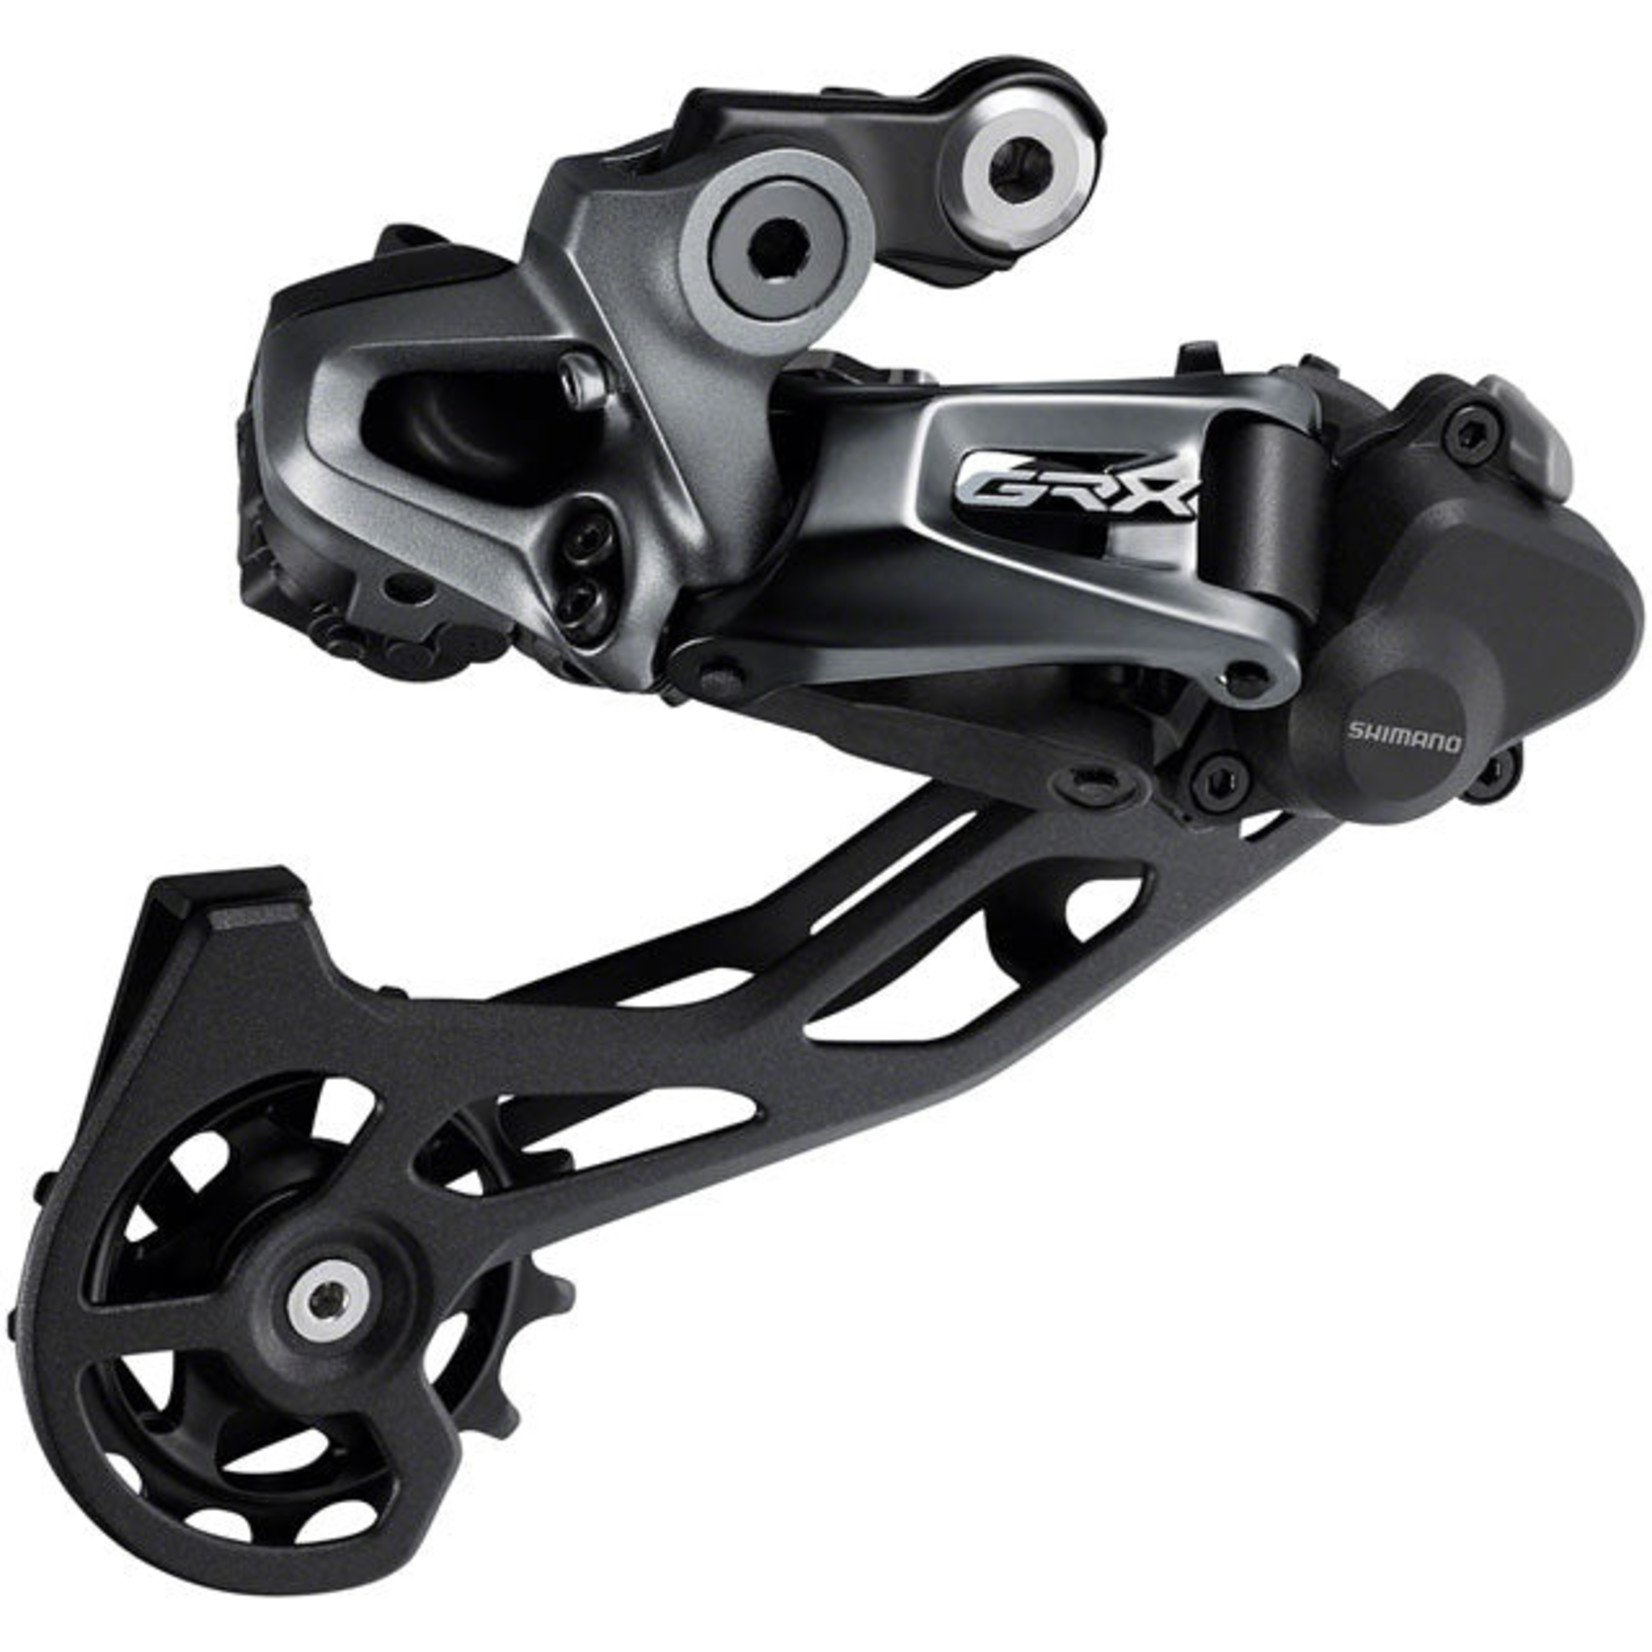 Shimano Shimano GRX RD-RX815 Rear Derailleur - 11-Speed, Long Cage, Black, With Clutch, Di2, For 1x and 2x